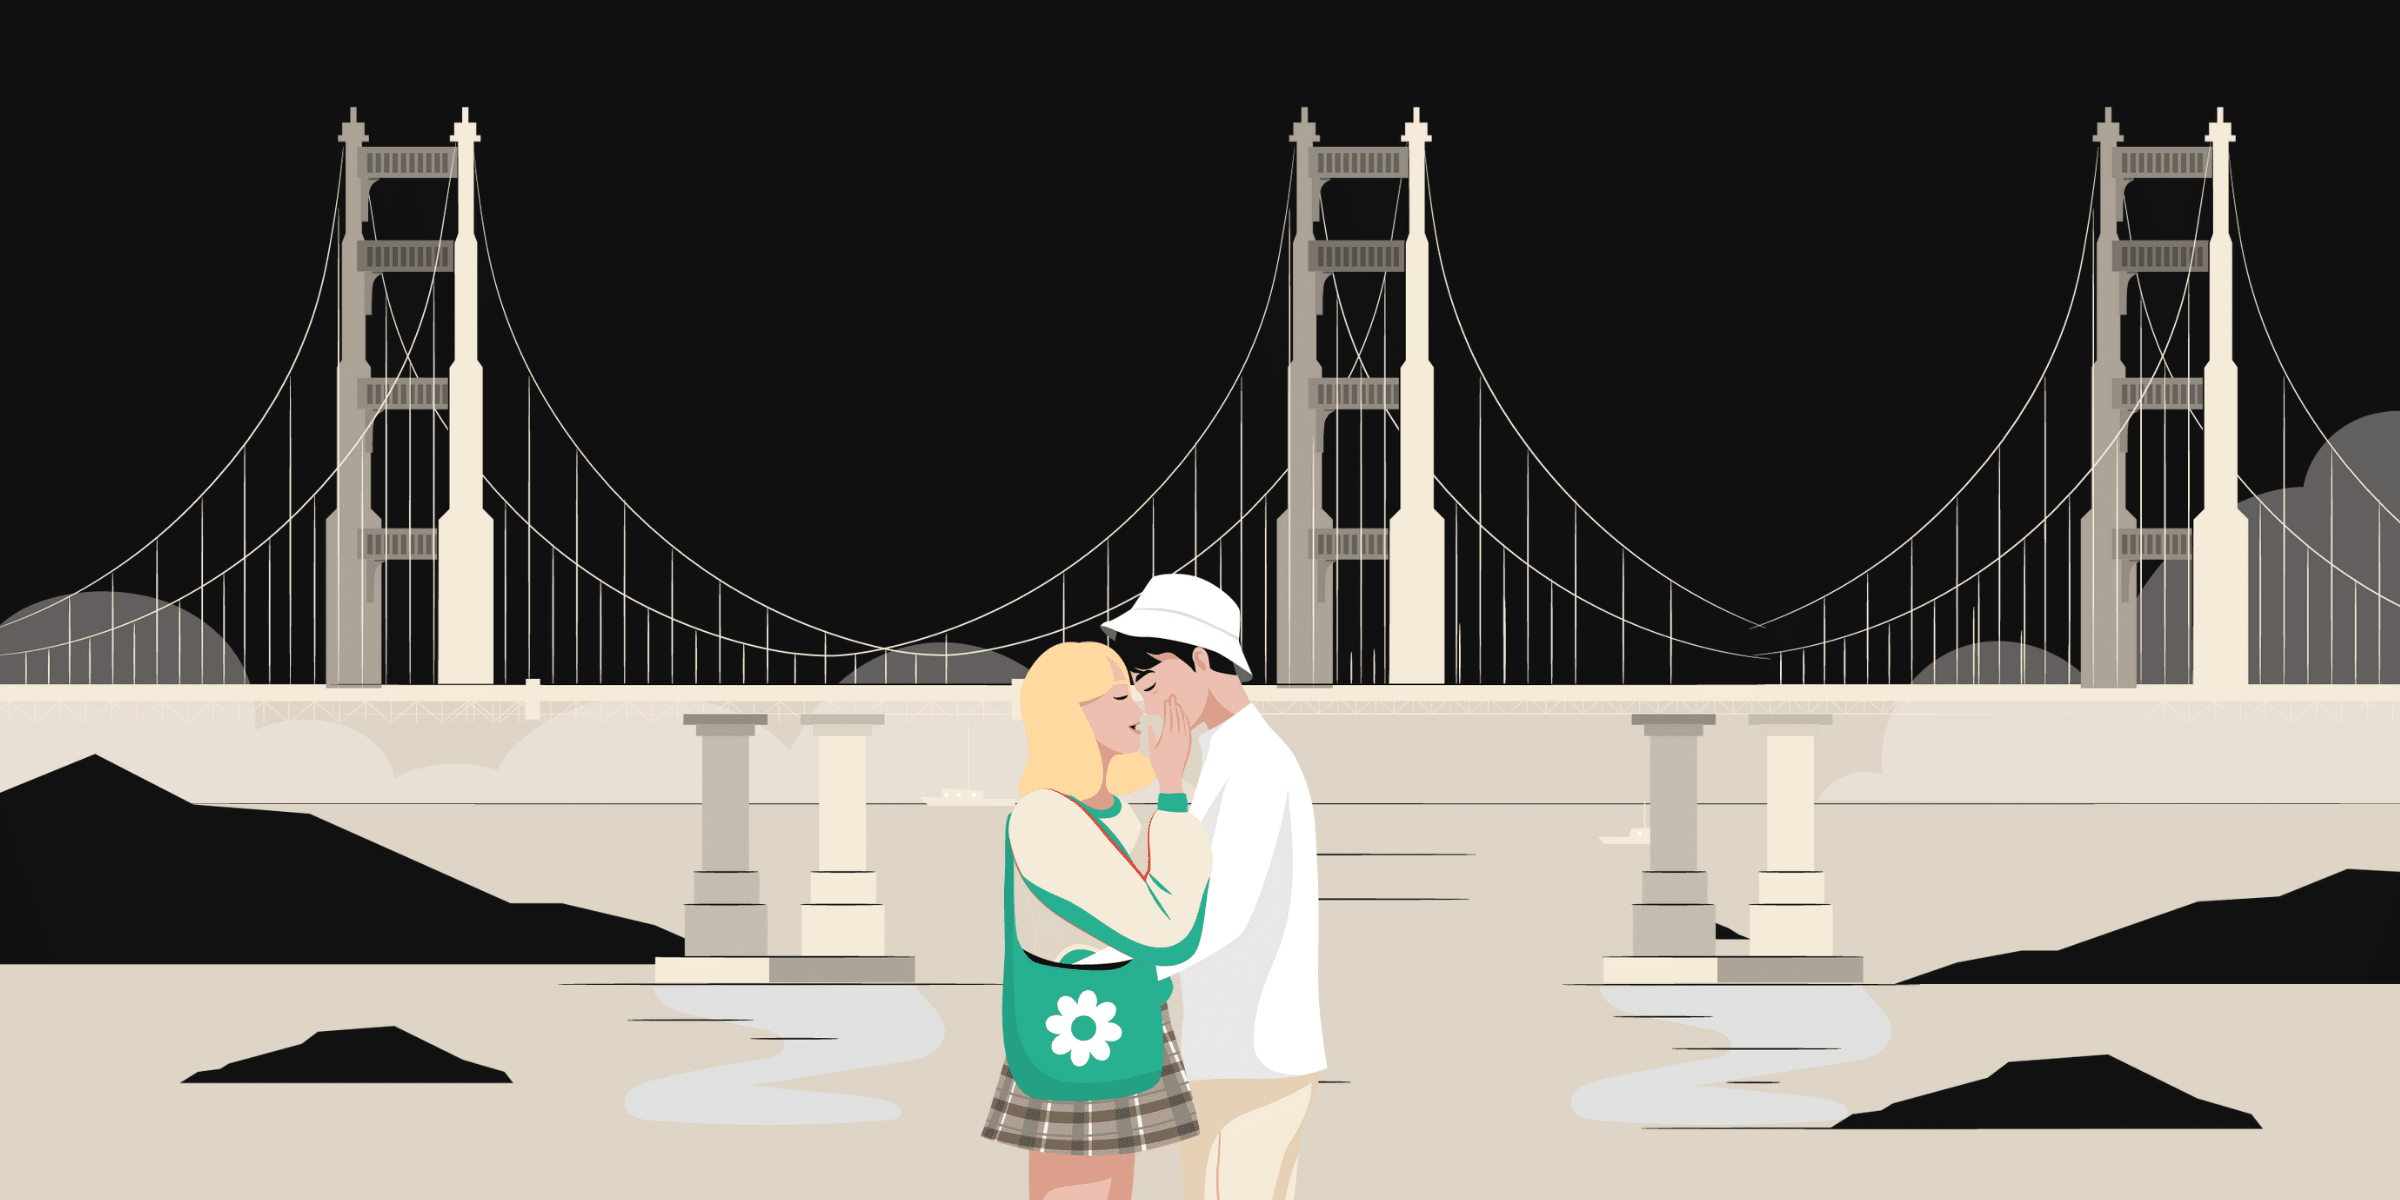 You’re in luck! We’ve compiled a list of the 9 best date ideas in San Francisco to impress your significant other with a big dose of romance.